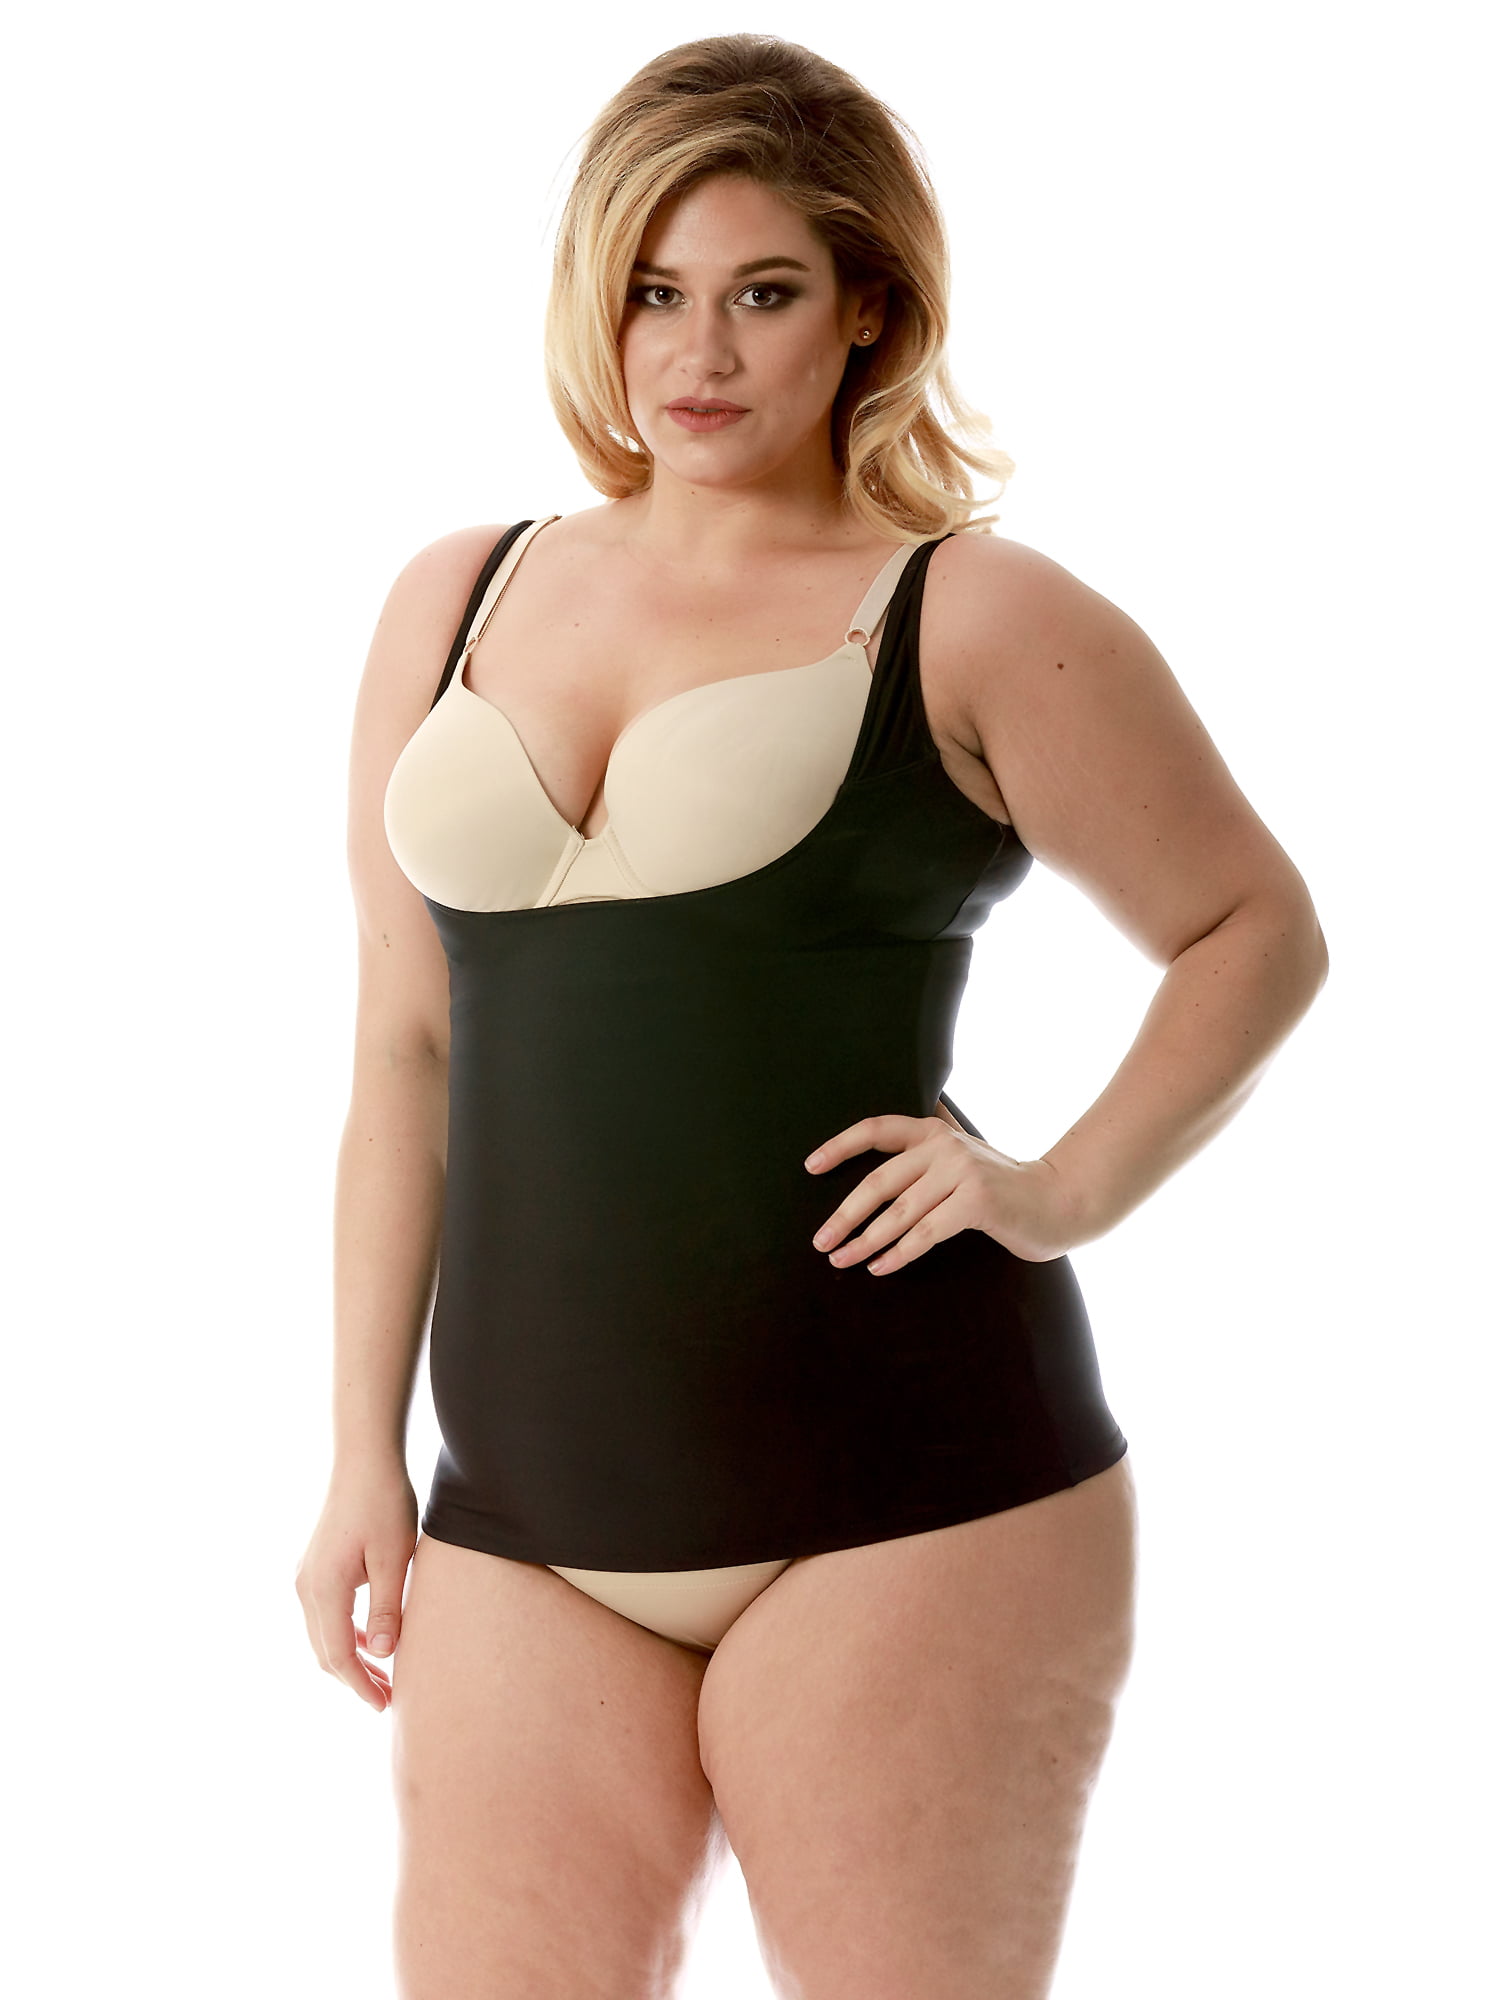 InstantFigure Women's Firm Compression Underbust Shaping and